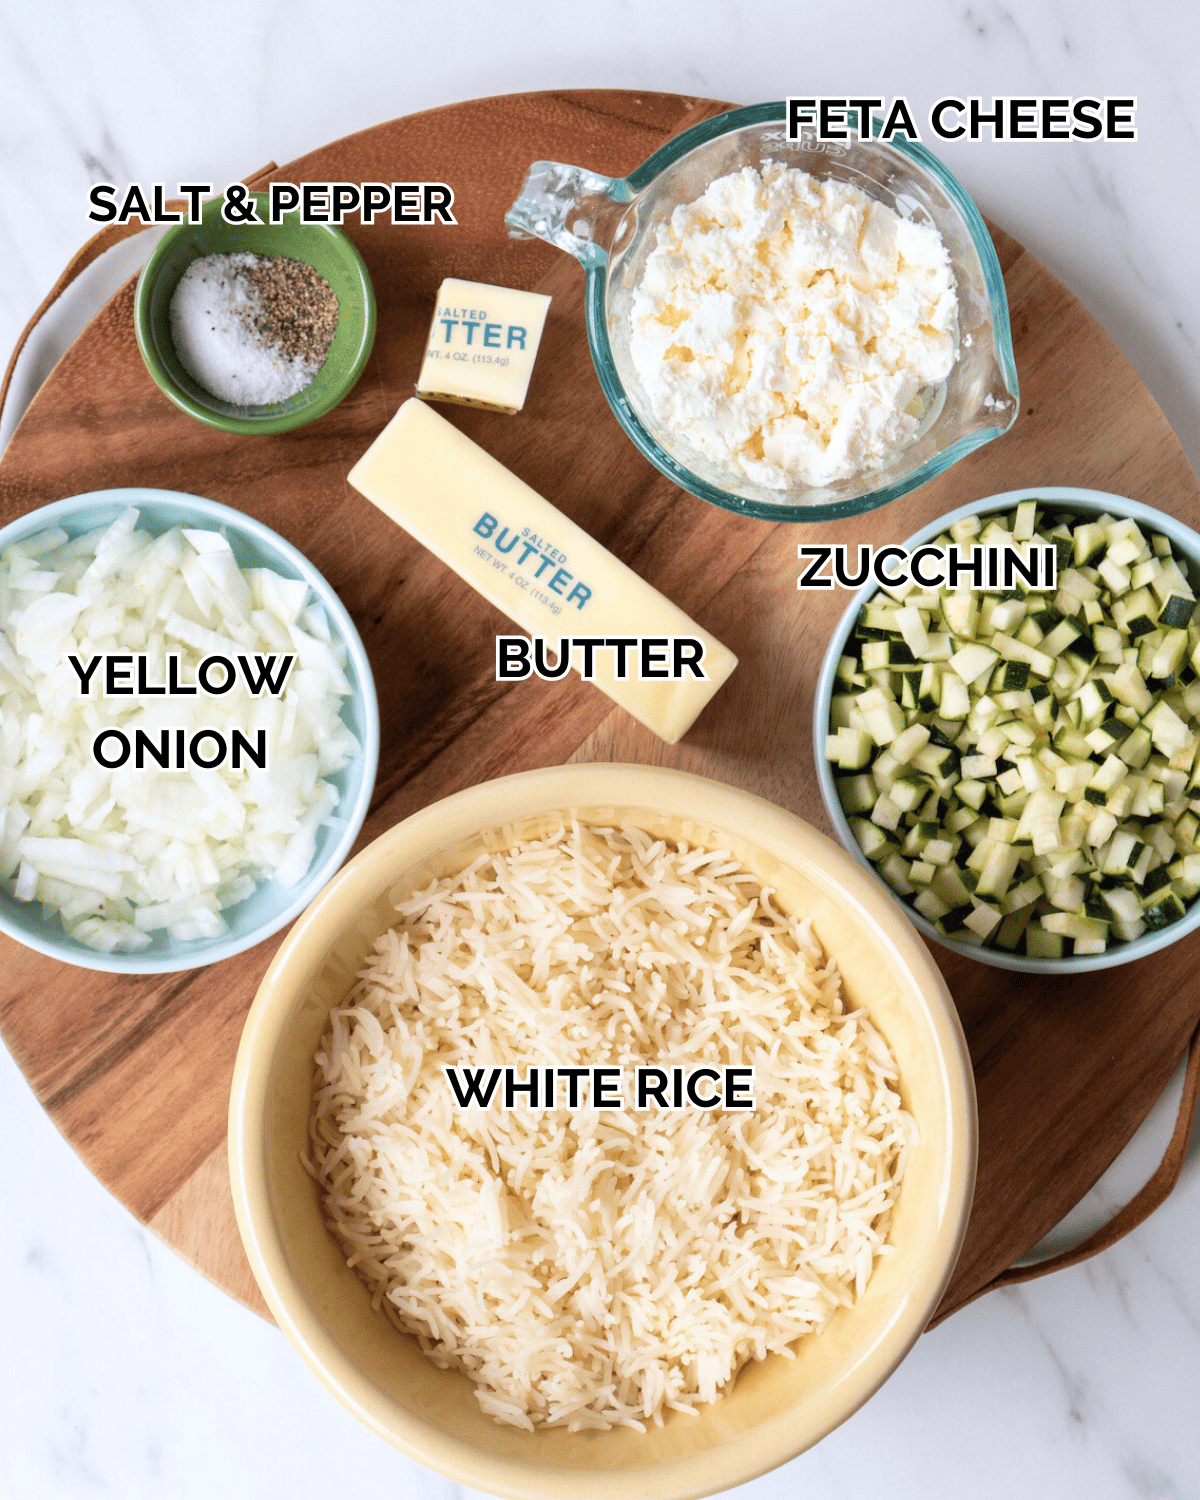 Crispy Rice Ingredients: Feta cheese, yellow onion, white rice, zucchini, butter, salt and pepper measured out and prepped on a wooden cutting board